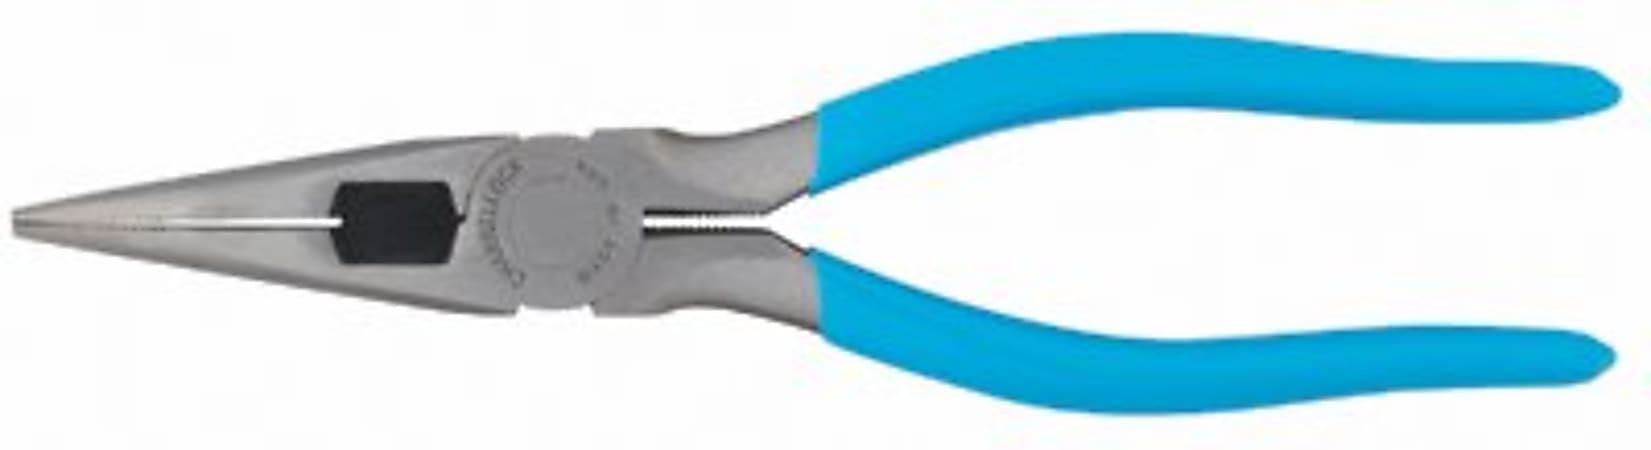 Long Nose Pliers, Straight Needle Nose, High Carbon Steel, 8 3/8 in